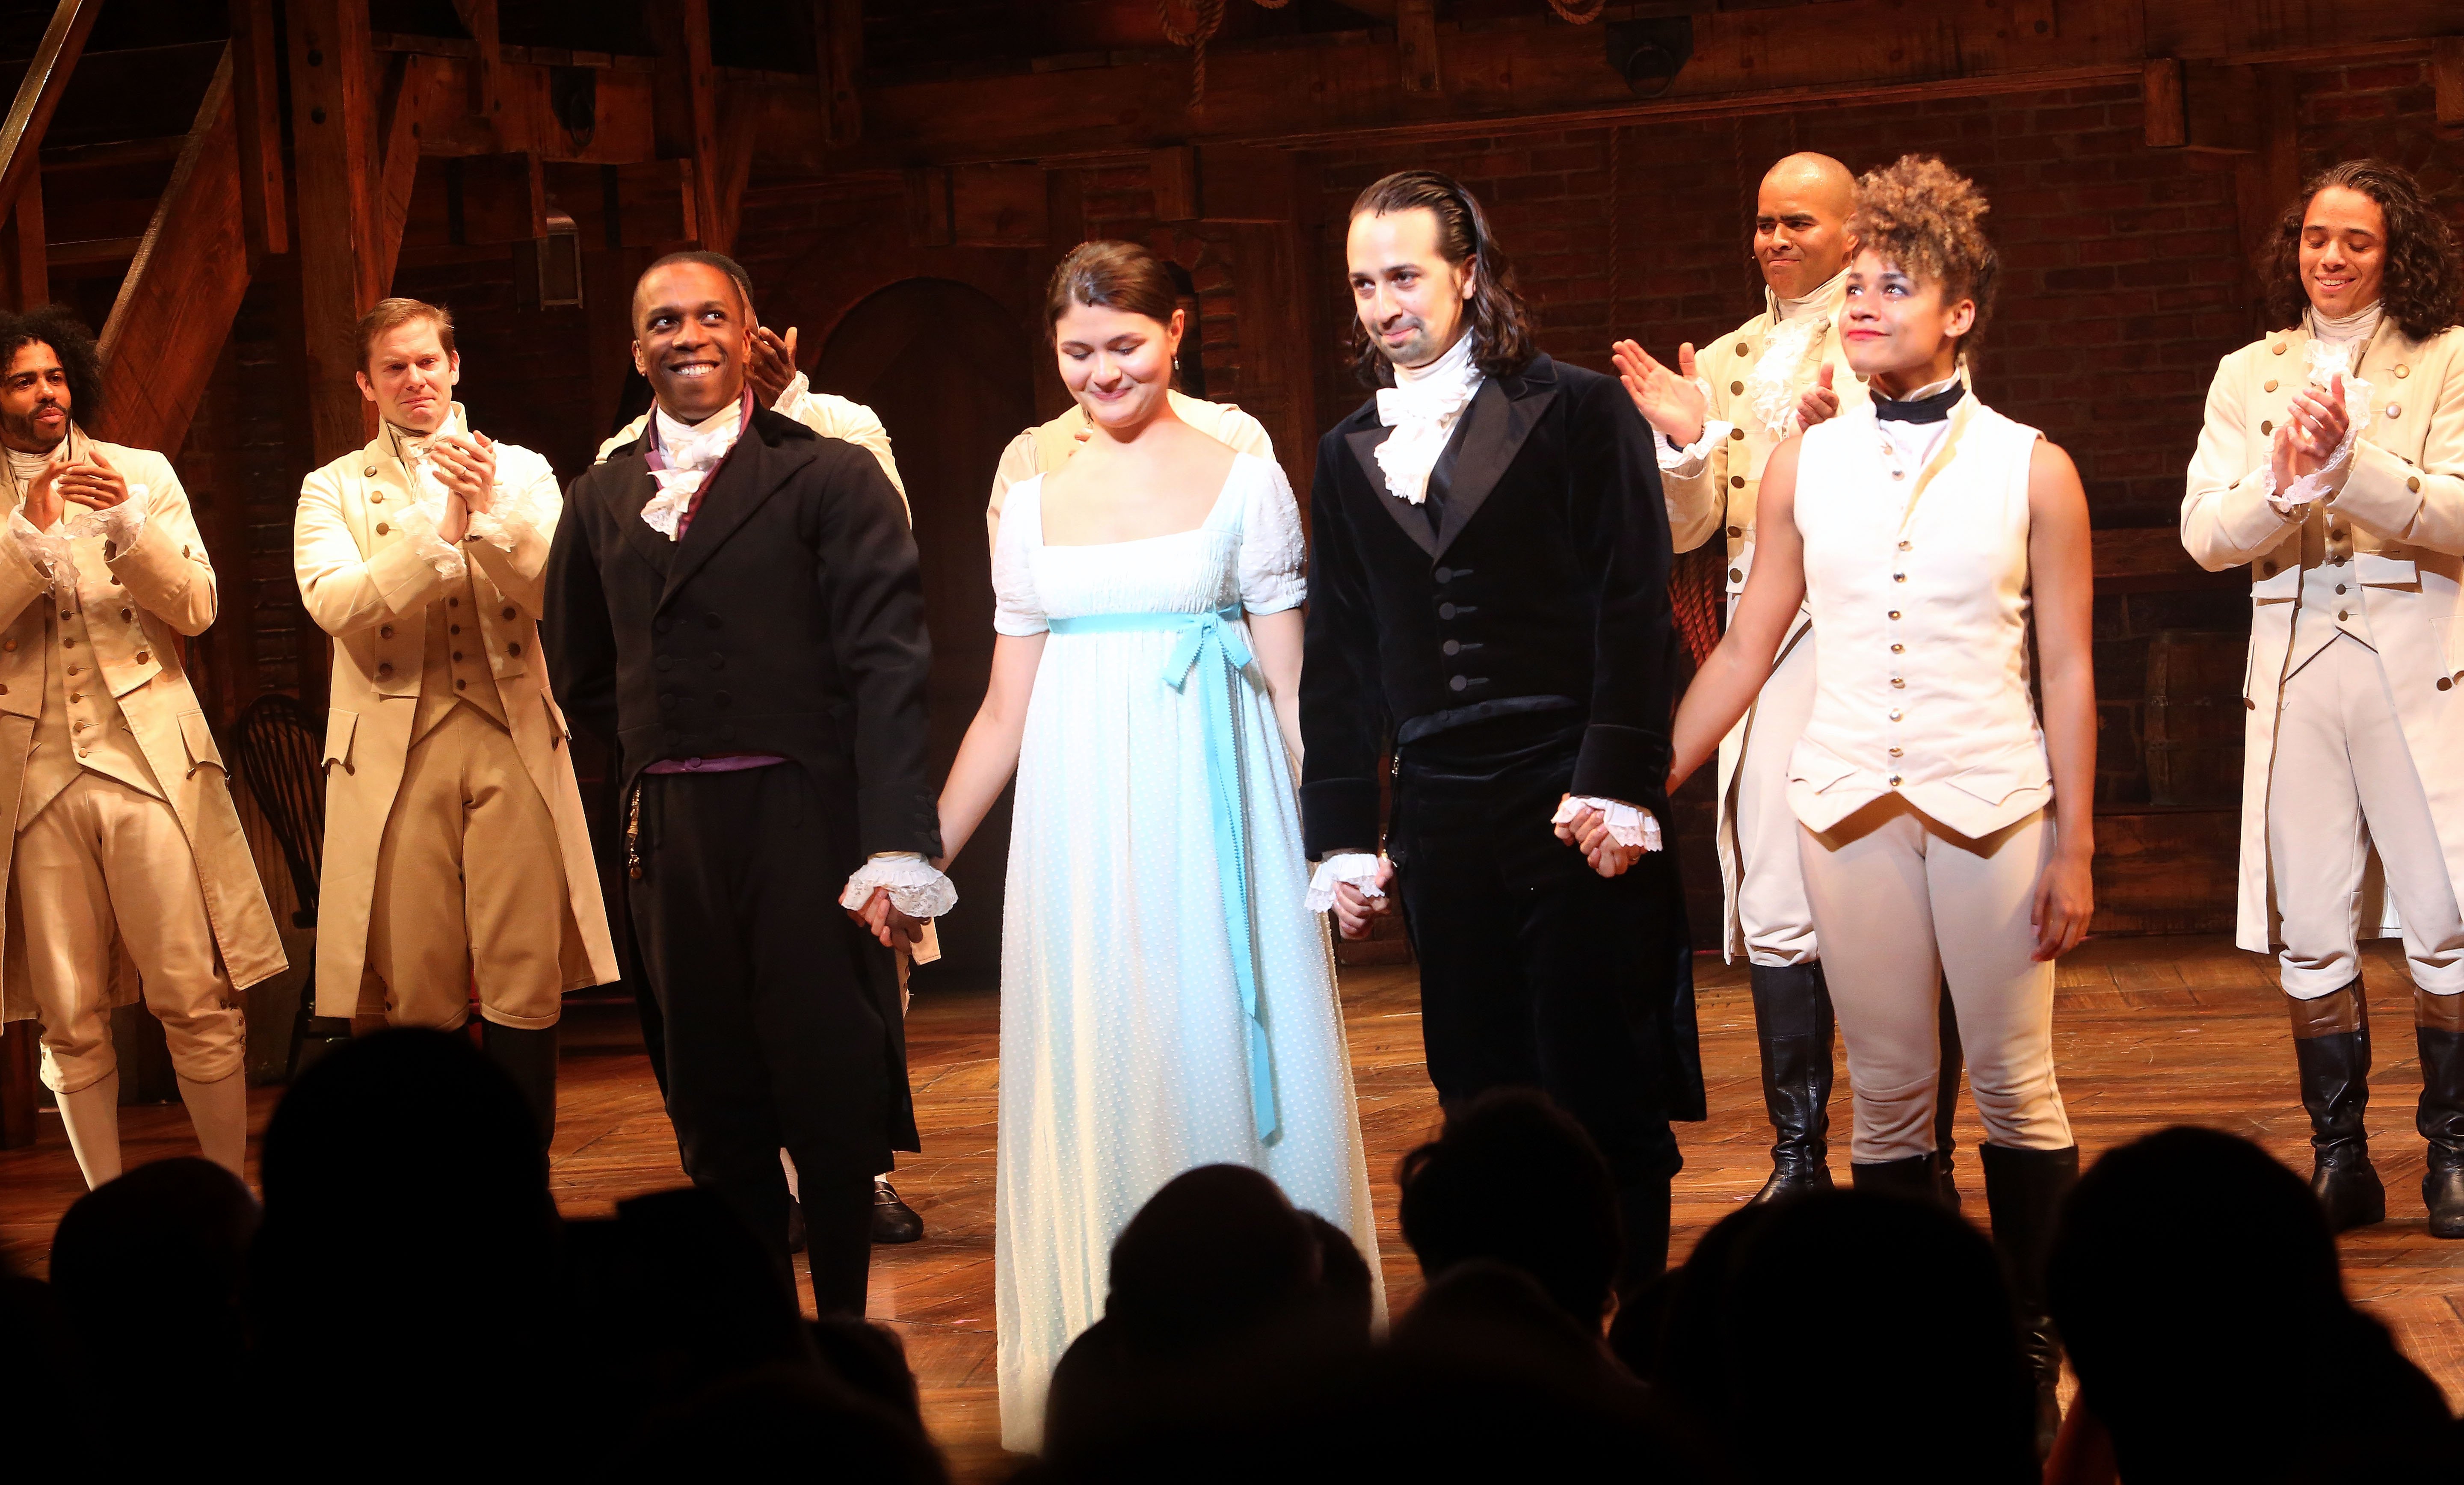 Lin-Manuel Miranda appears in his final performance as 'Alexander Hamilton' in 'Hamilton' on Broadway on stage with the cast